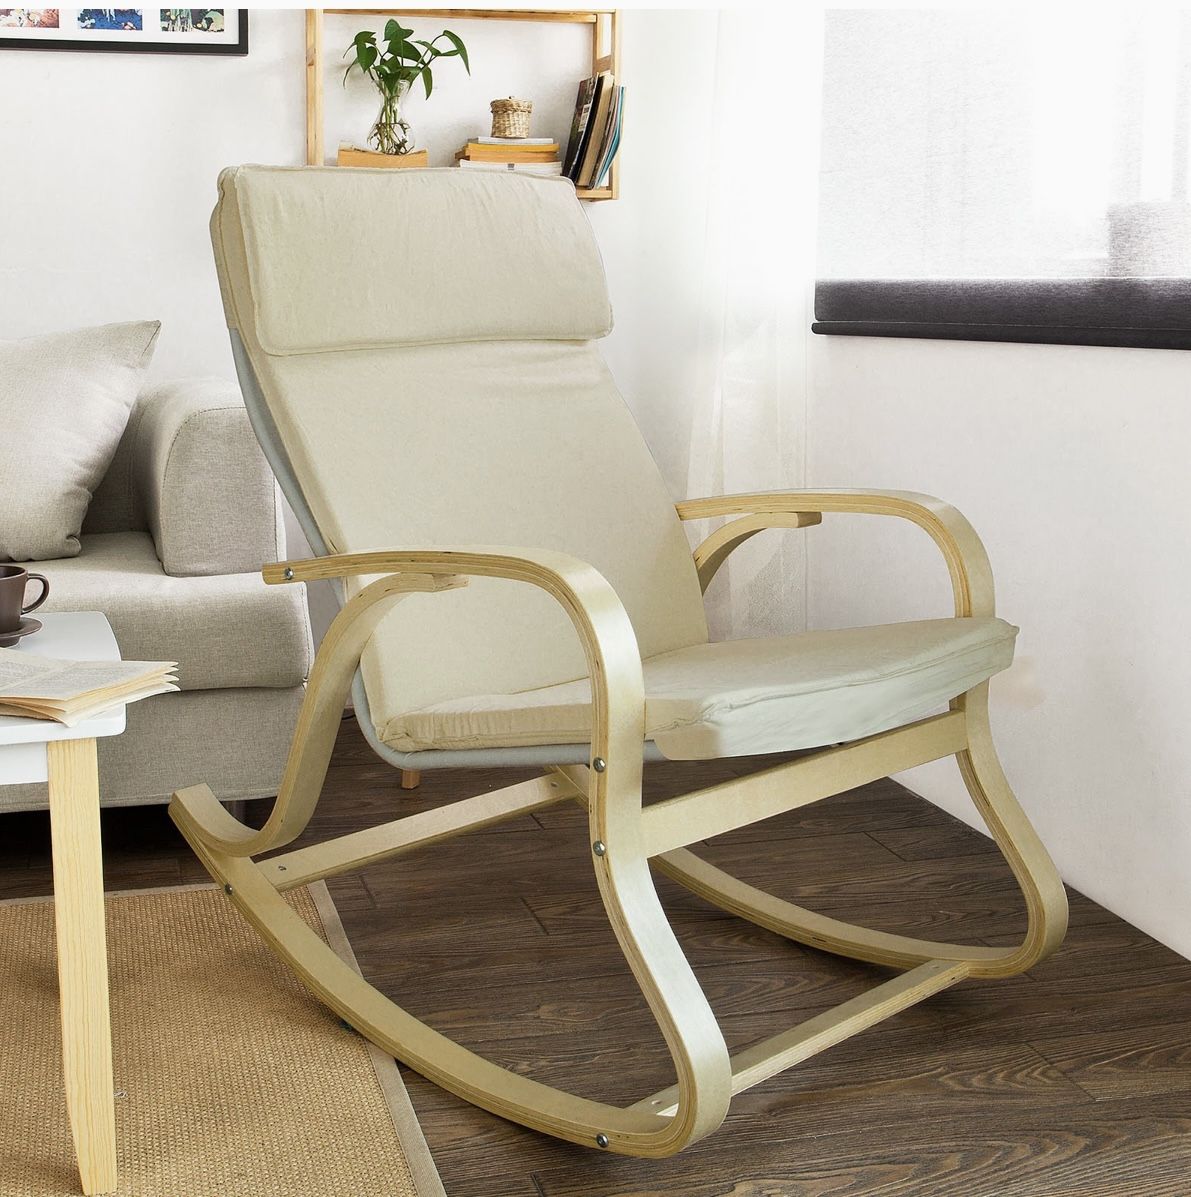 Comfortable Relax Rocking Chair, Lounge Chair Relax Chair with Cushion